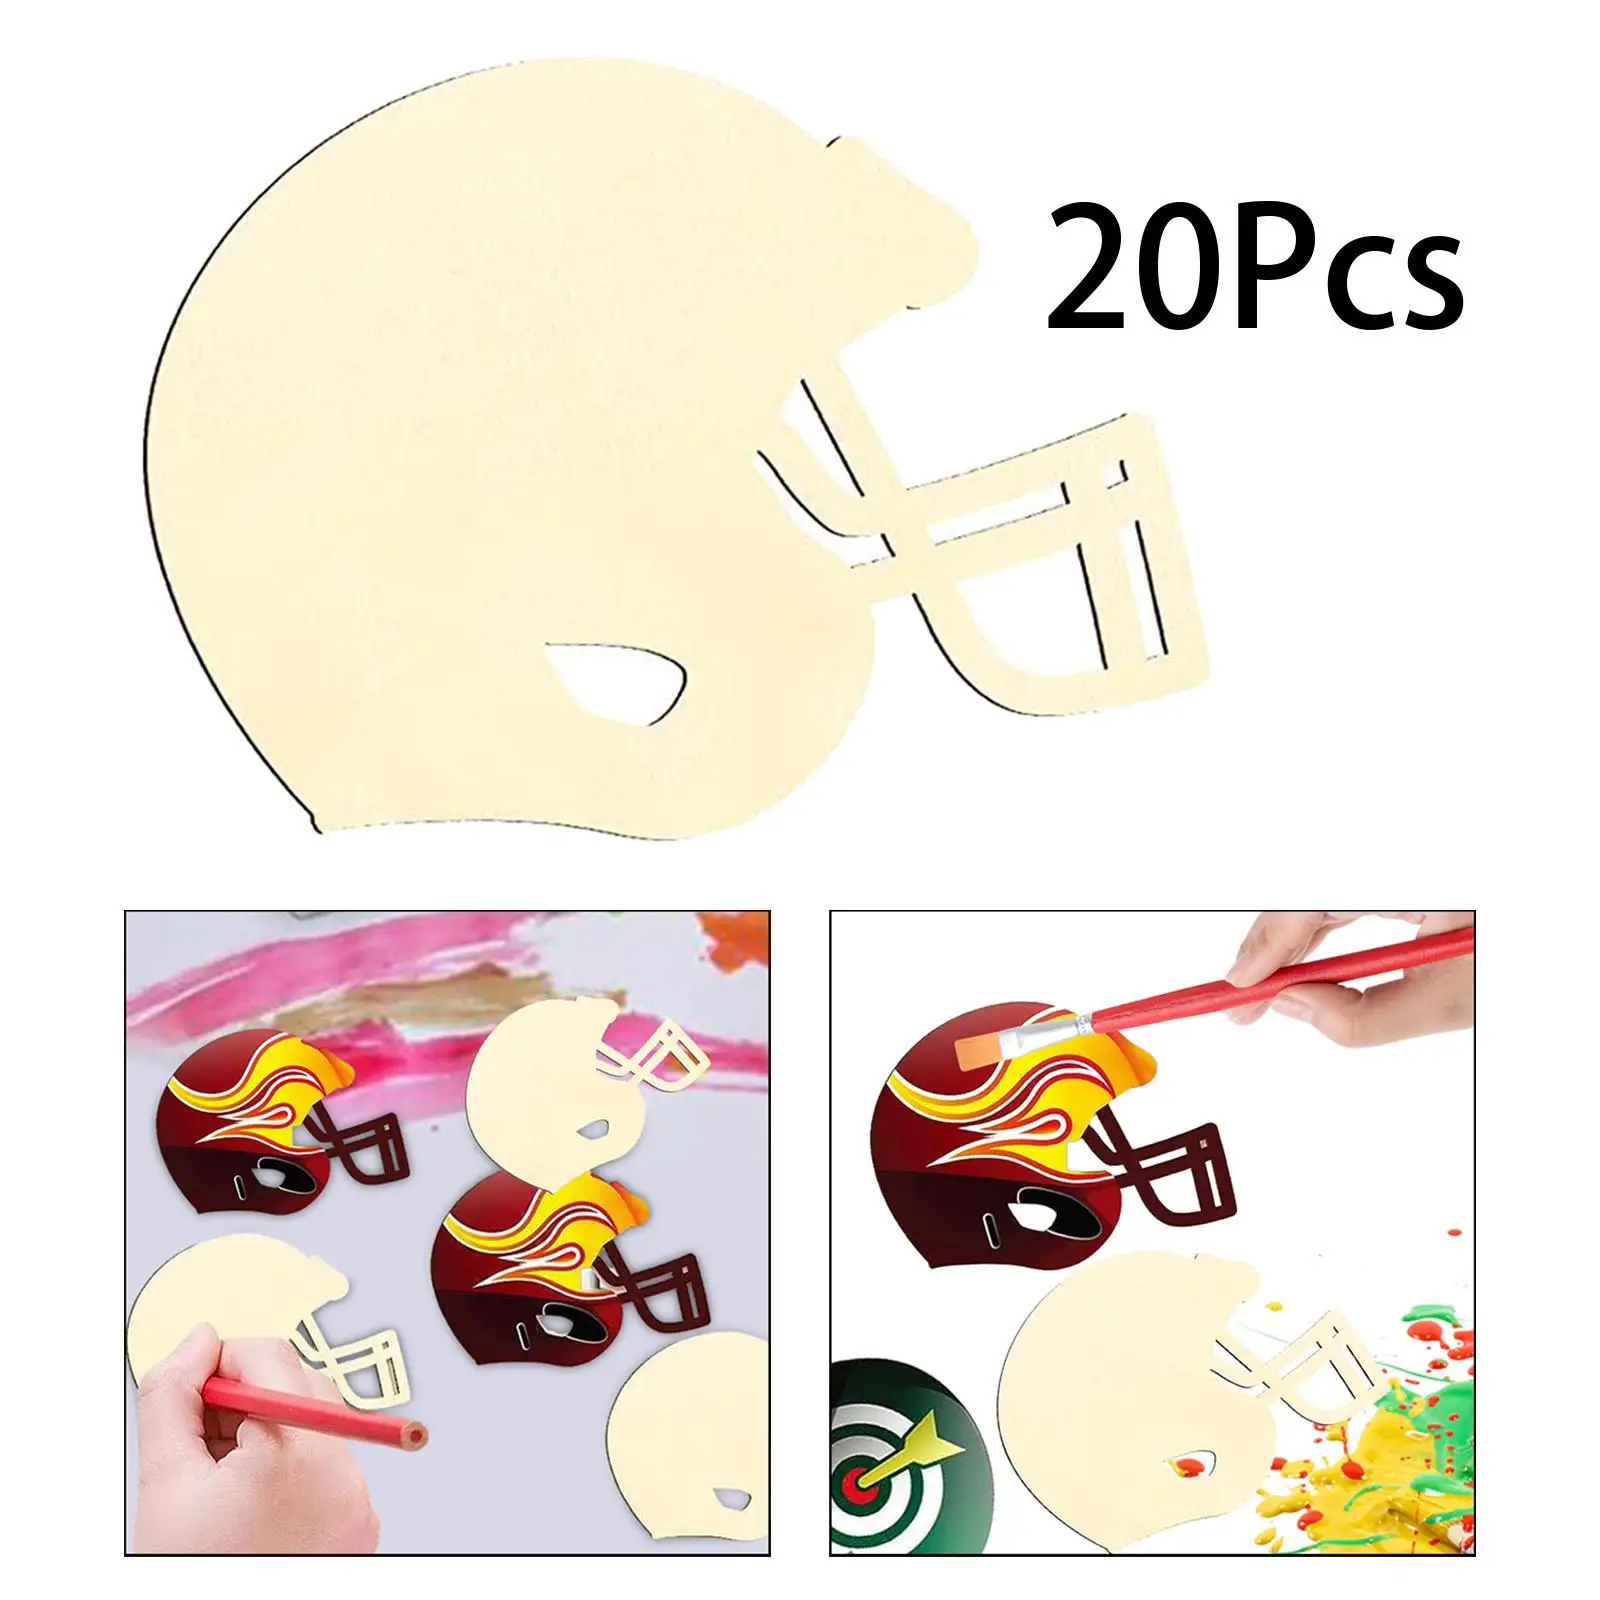 20 Pieces Wooden Helmet Shaped Cutouts Home Decoration Toy DIY Crafting for Woodworking Supplies Wedding Signs Xmas Scrapbooking